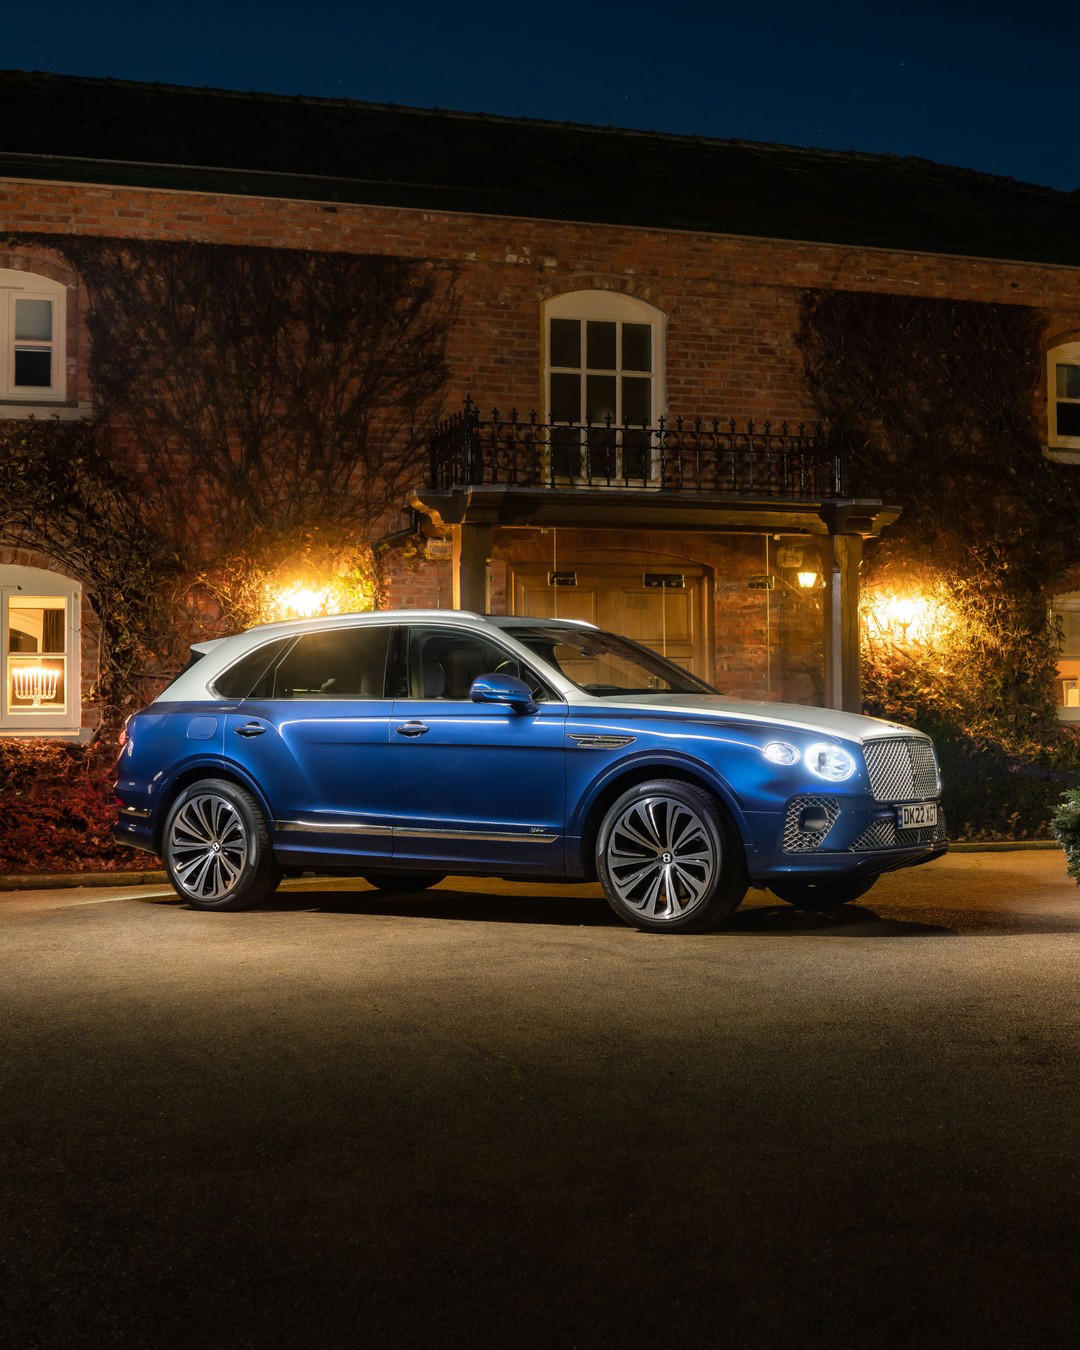 Bentley Motors - Everyone in the #Bentley family wishes you a bright and meaningful Hanukkah